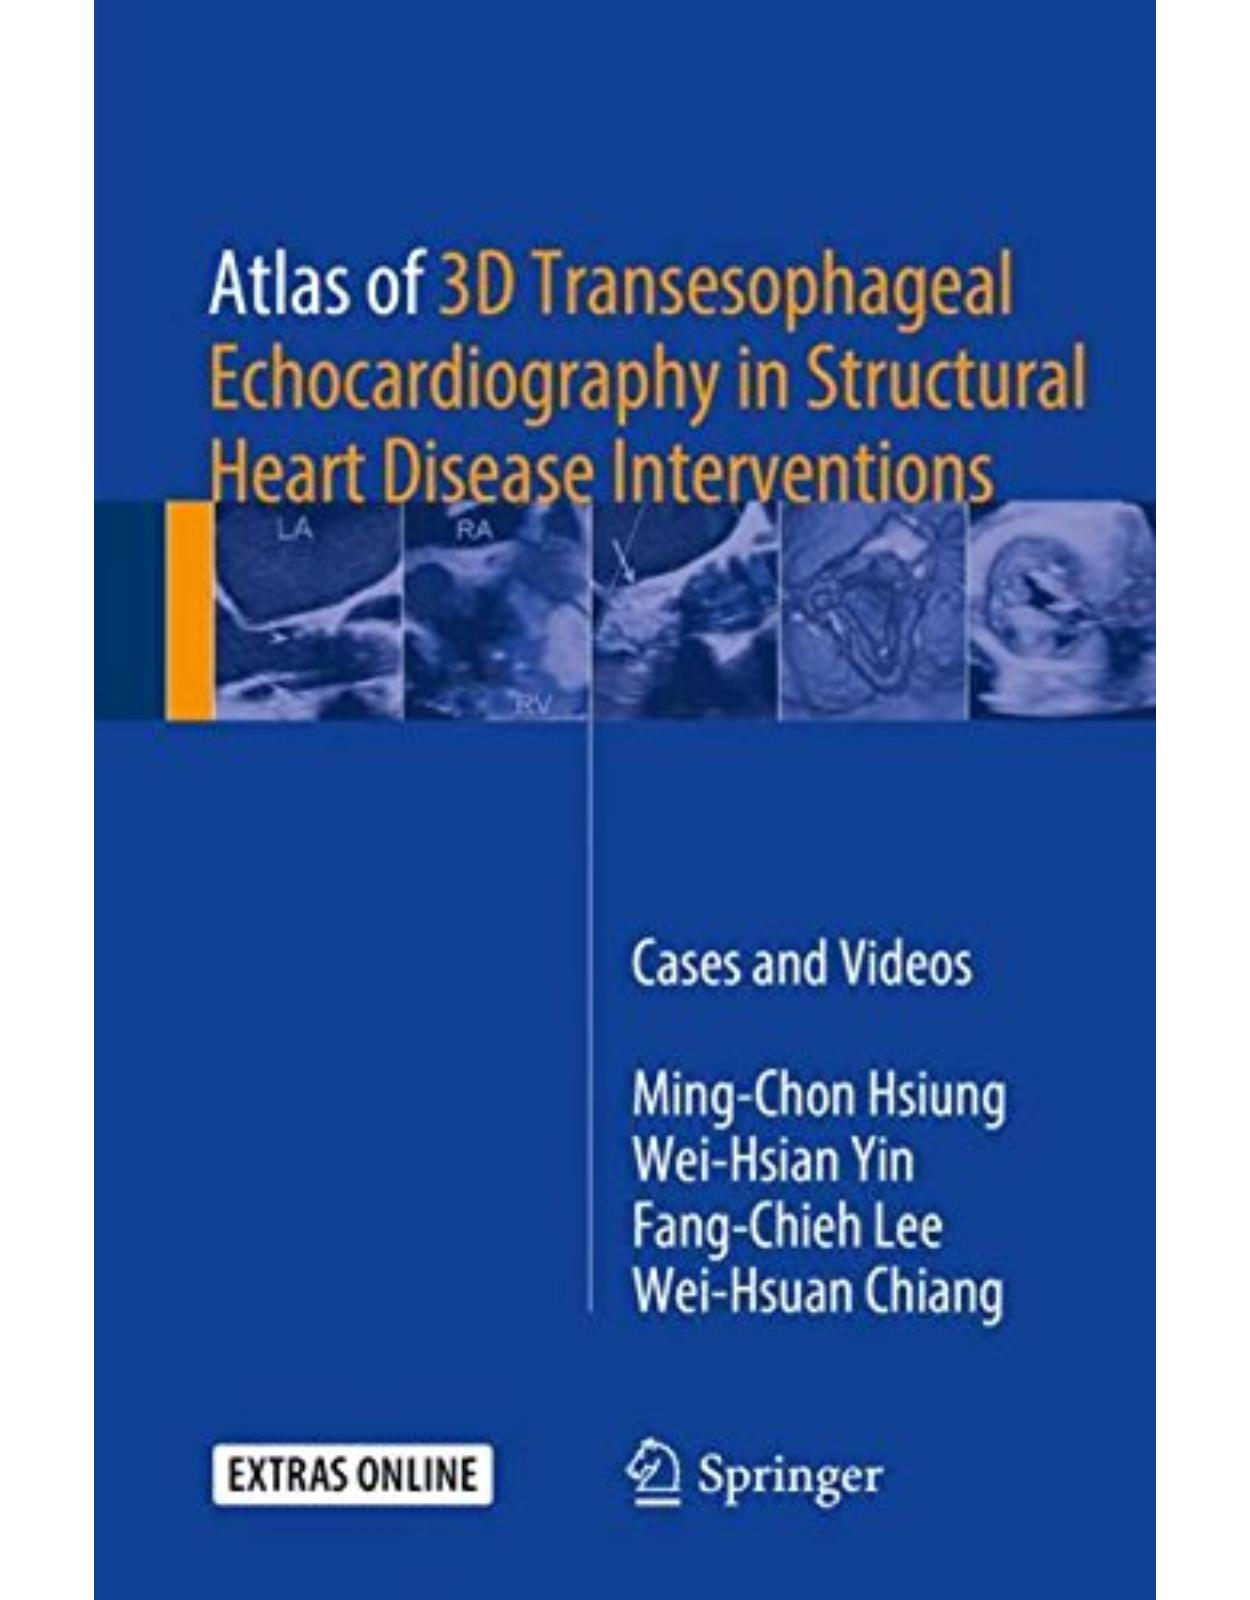 Atlas of 3D Transesophageal Echocardiography in Structural Heart Disease Interventions: Cases and Videos 